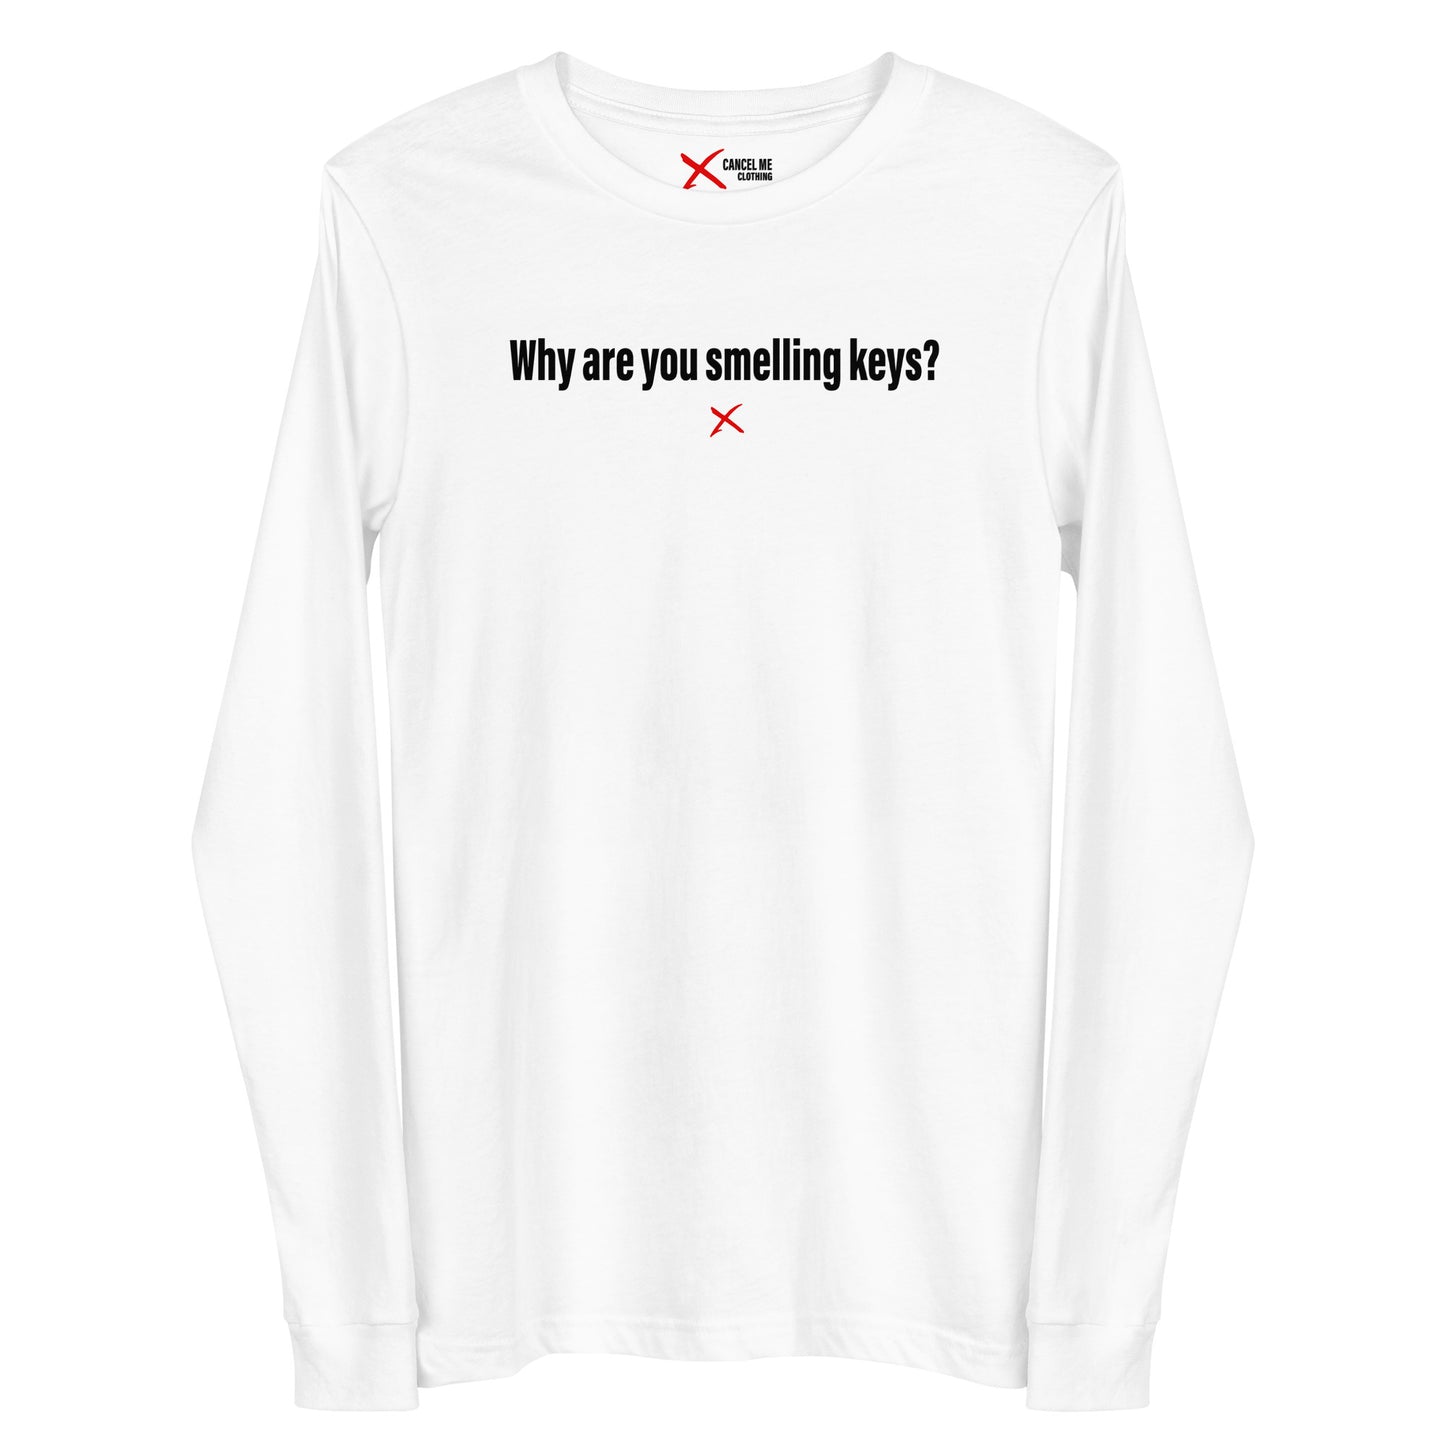 Why are you smelling keys? - Longsleeve